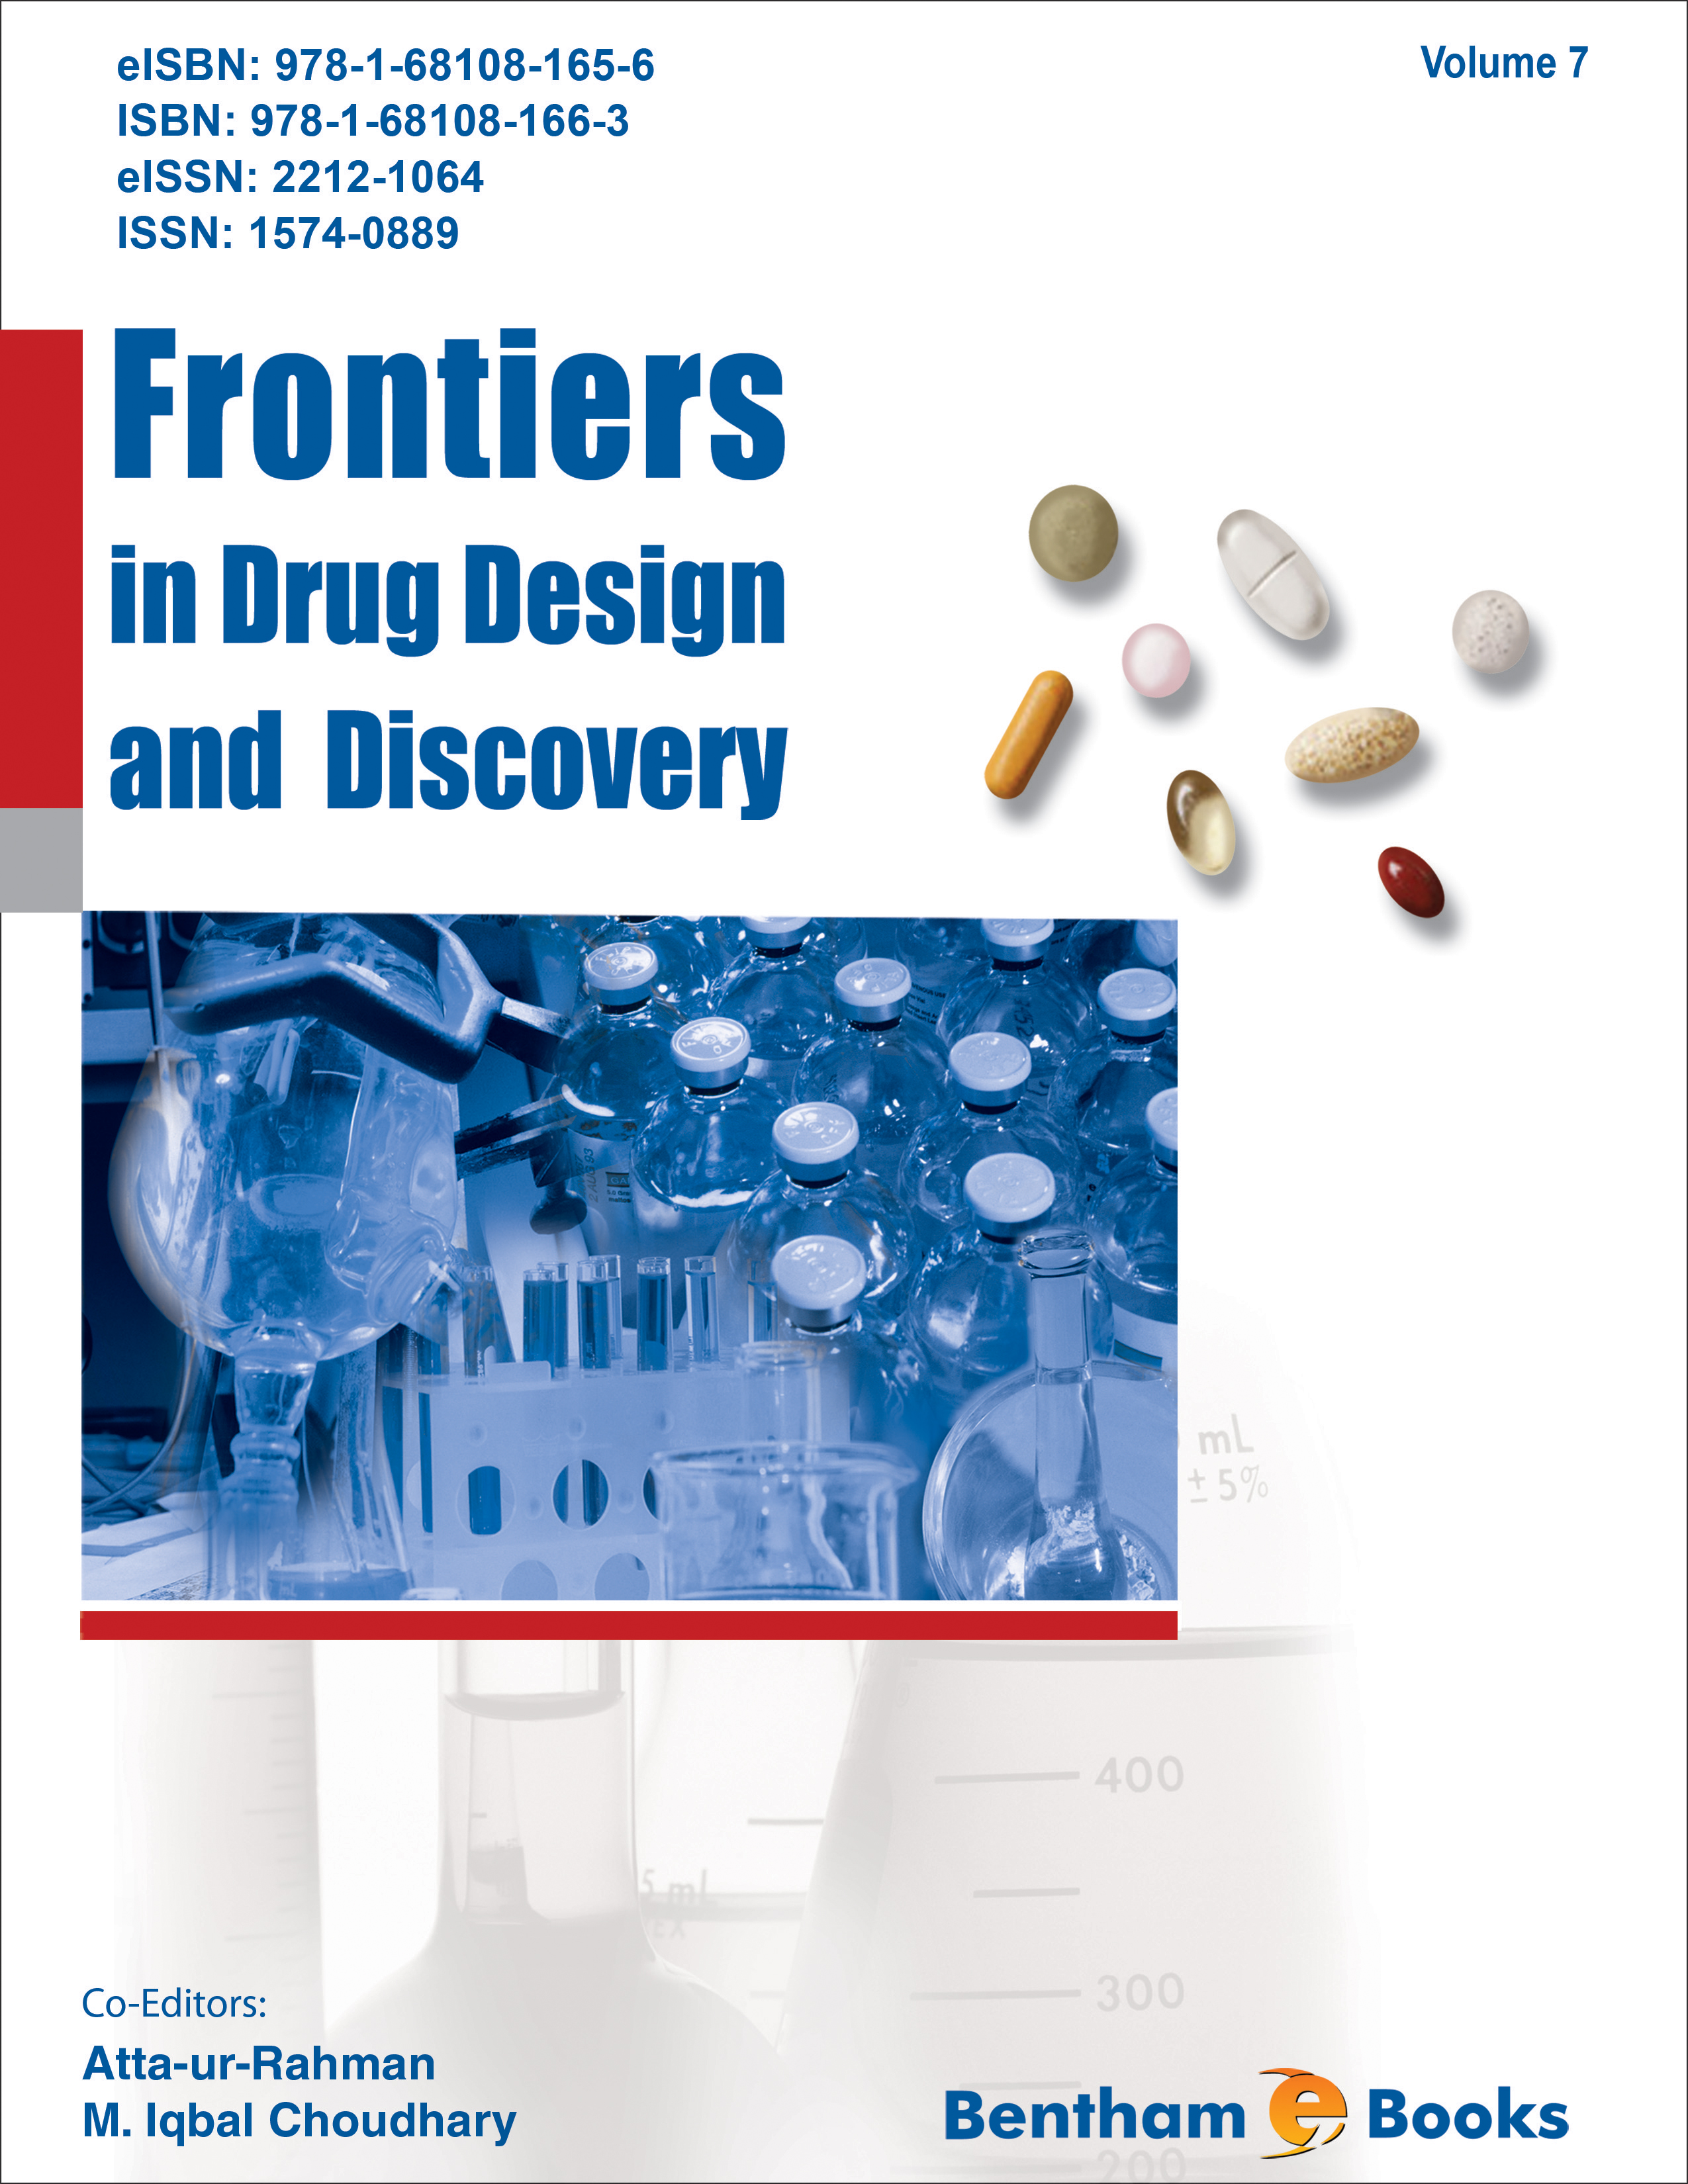 Frontiers in Drug Design and Discovery